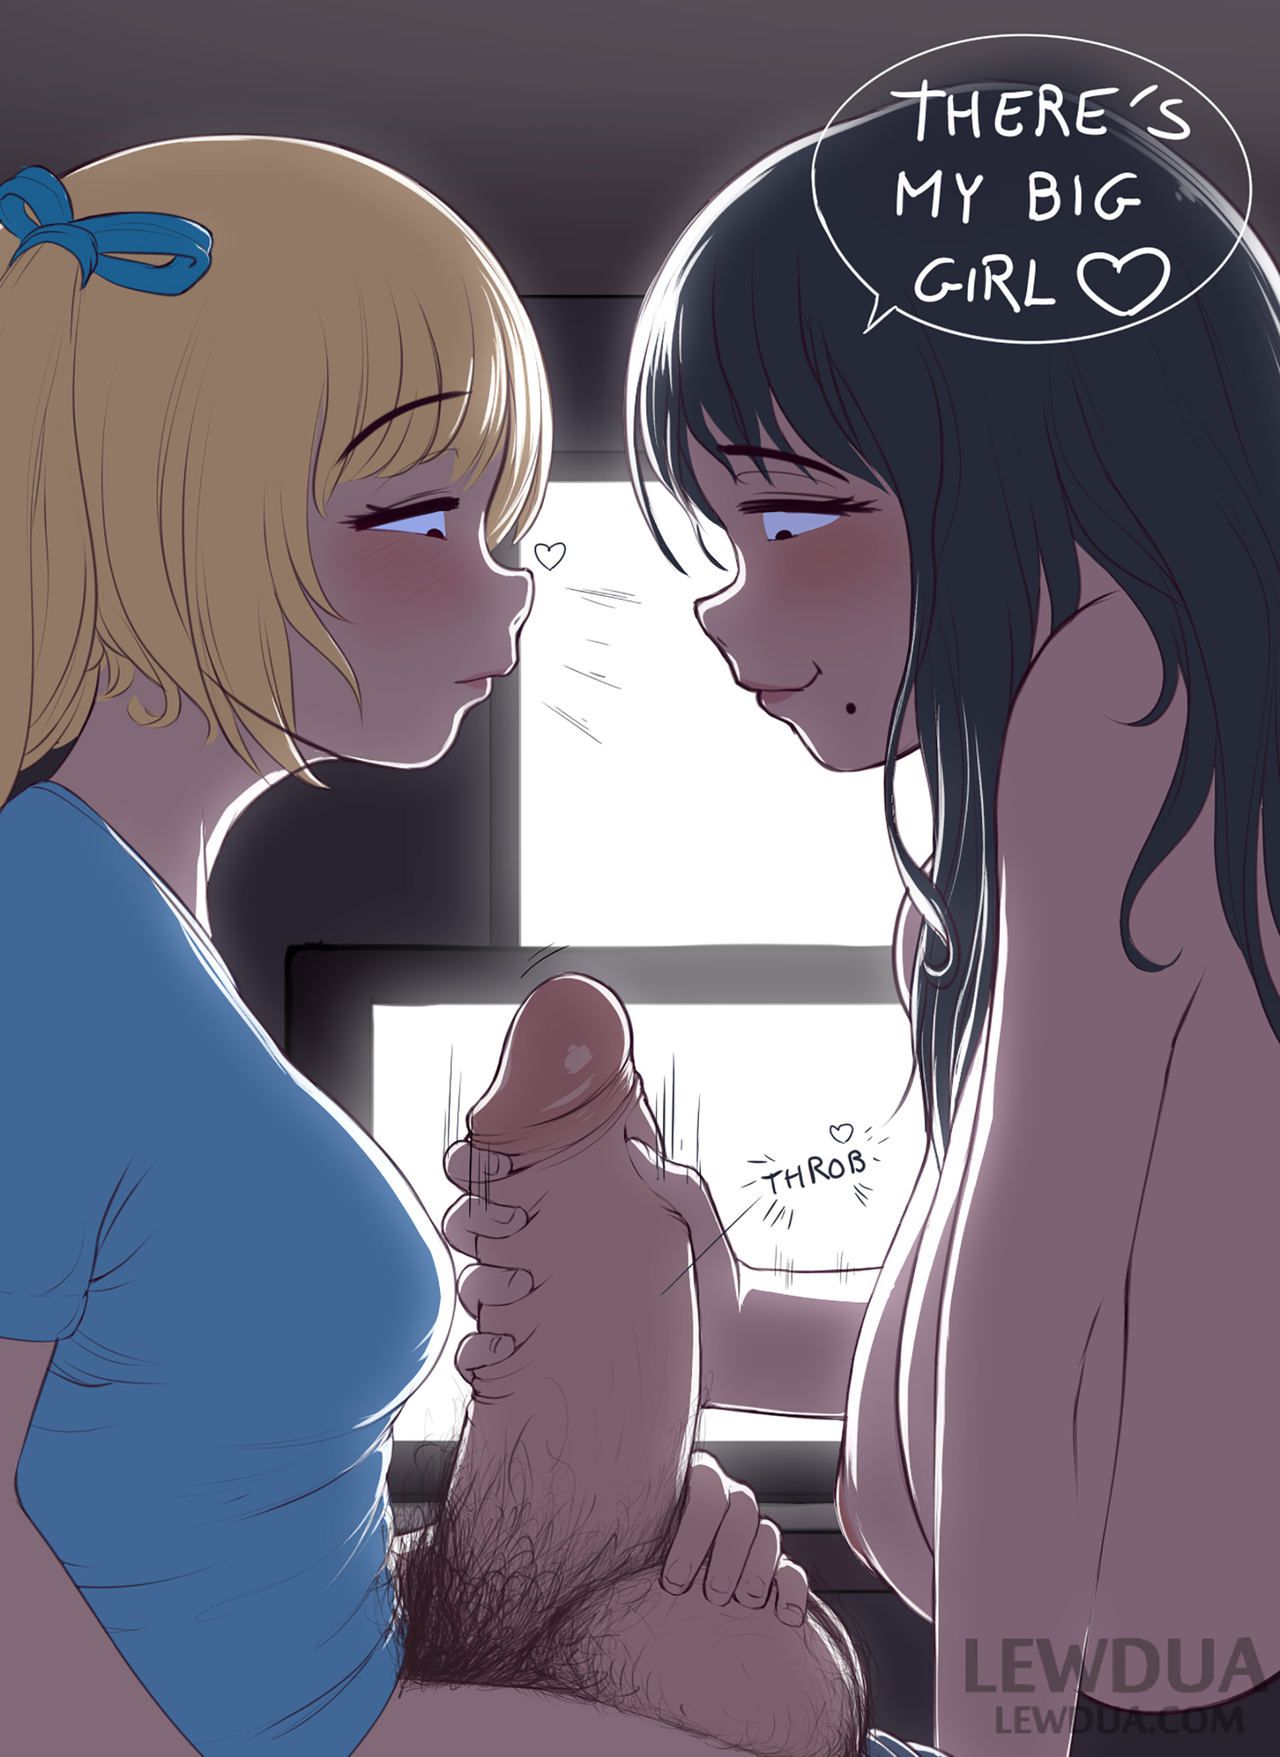 [Lewdua] Love is Sharing - Nessie and Alison 36